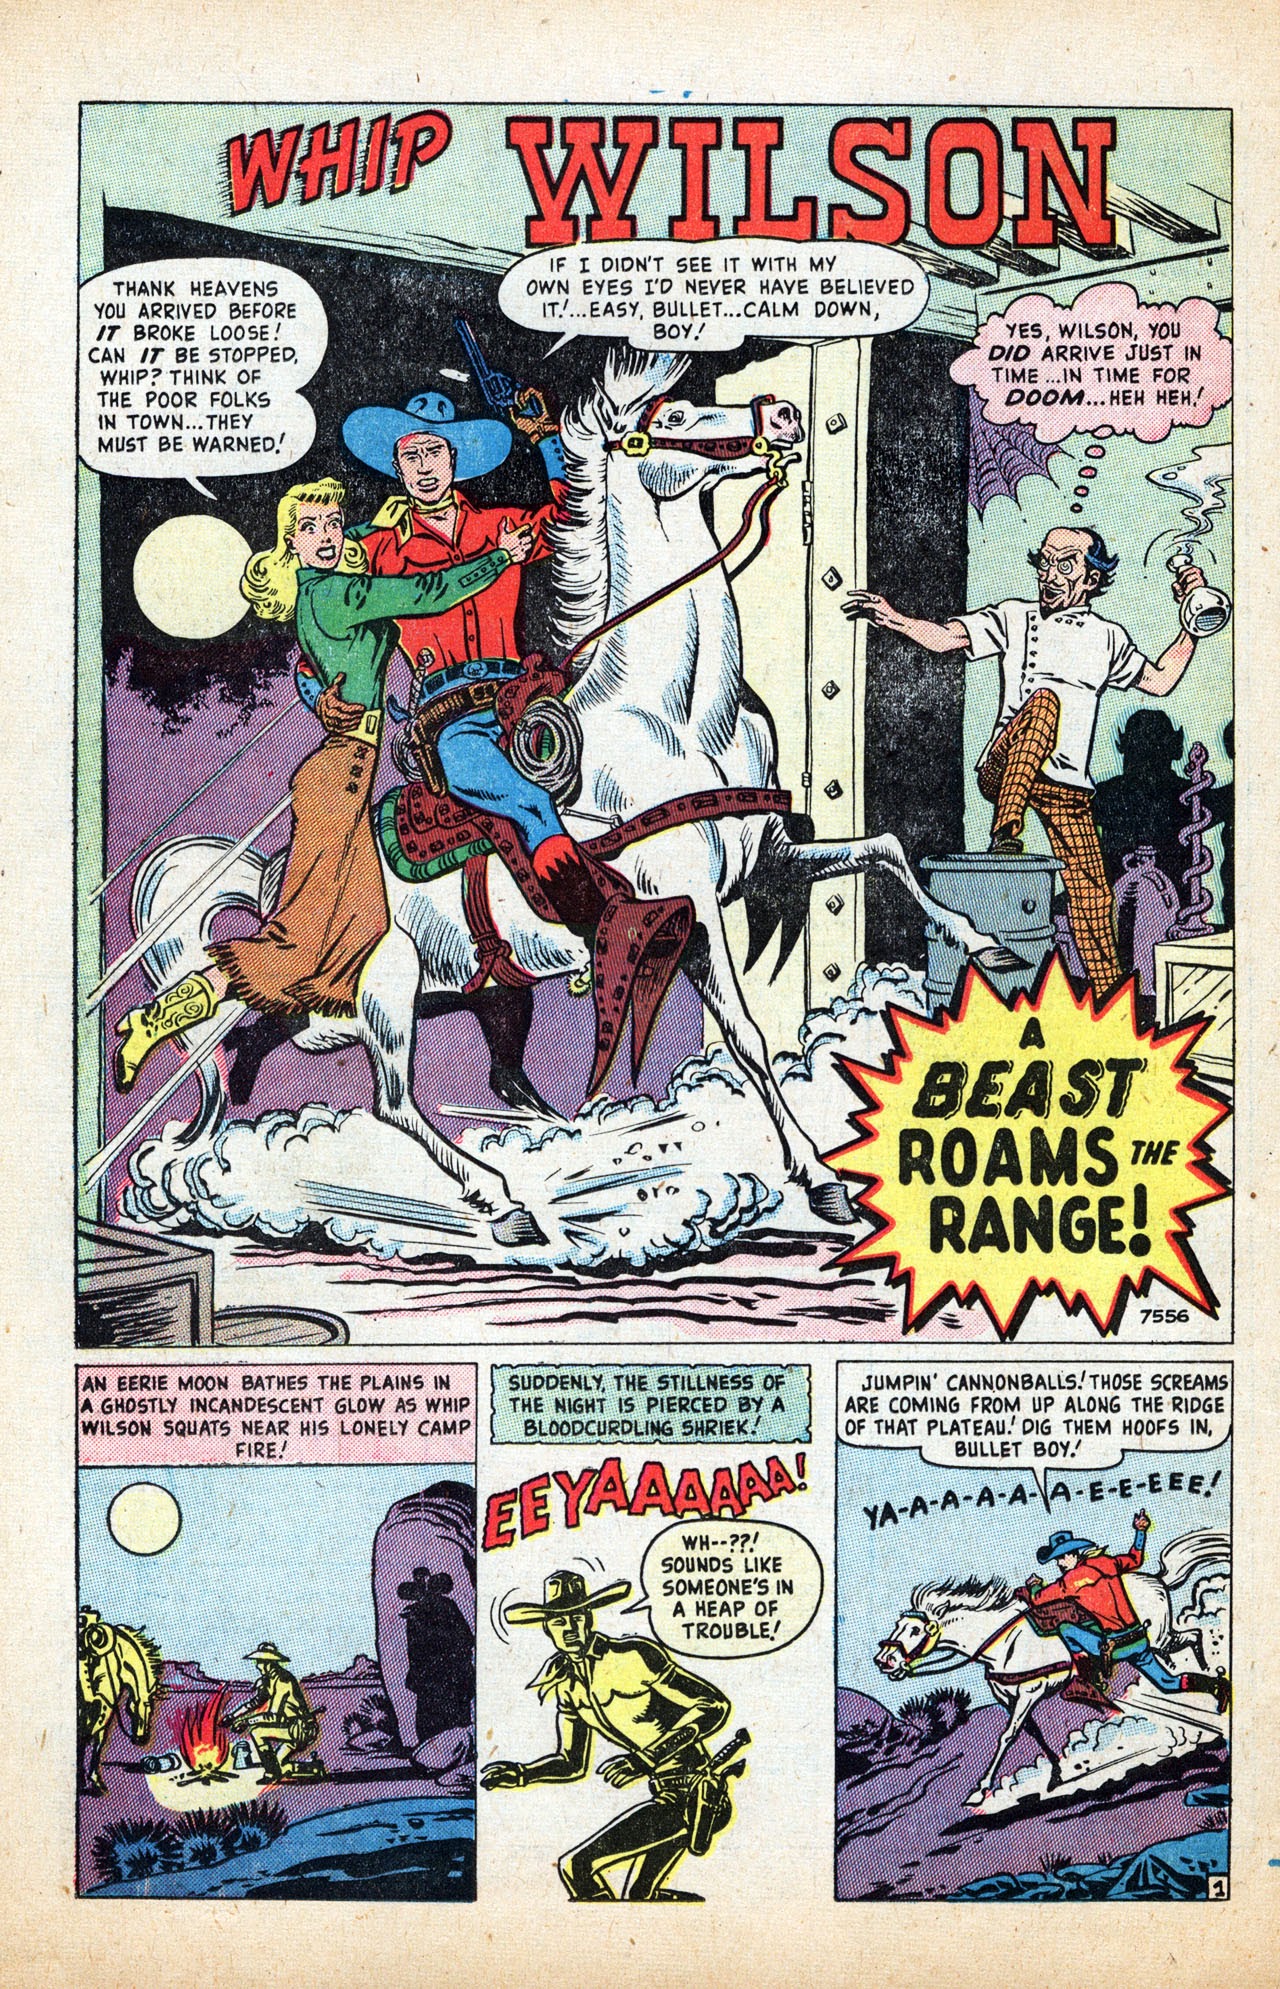 Read online Whip Wilson comic -  Issue #11 - 26